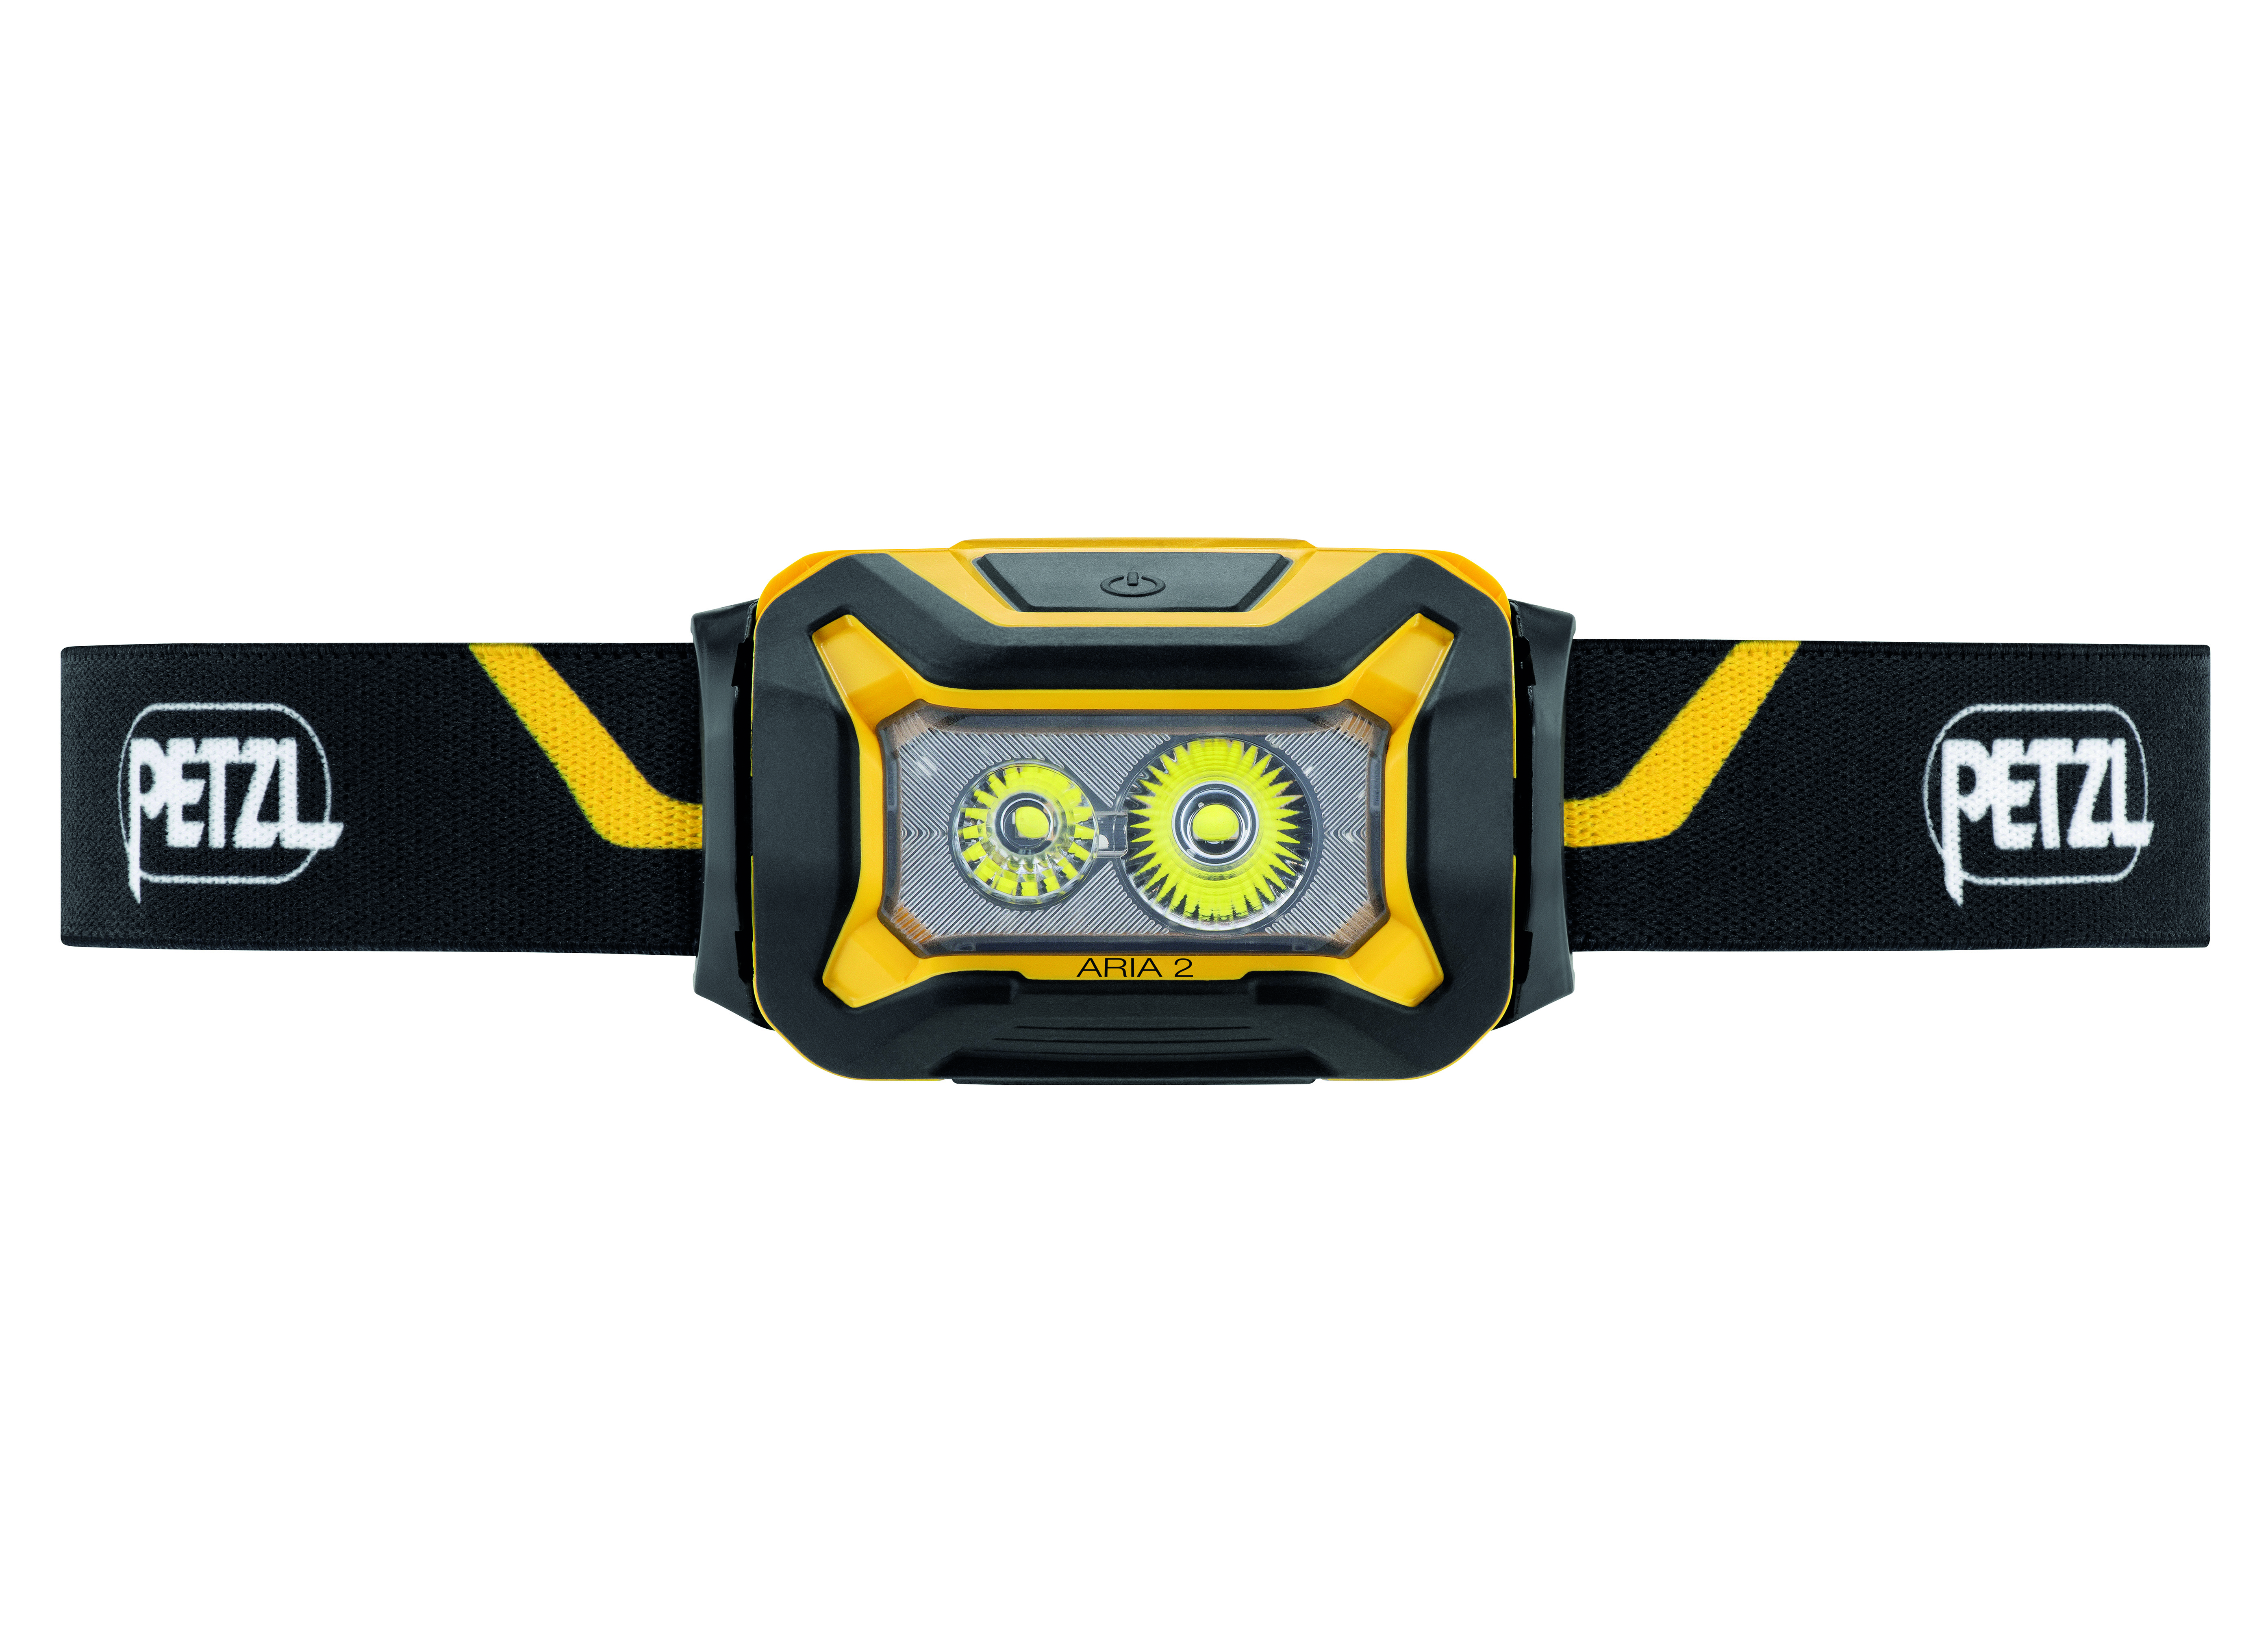 Petzl ARIA 2 Compact Headlamp from GME Supply